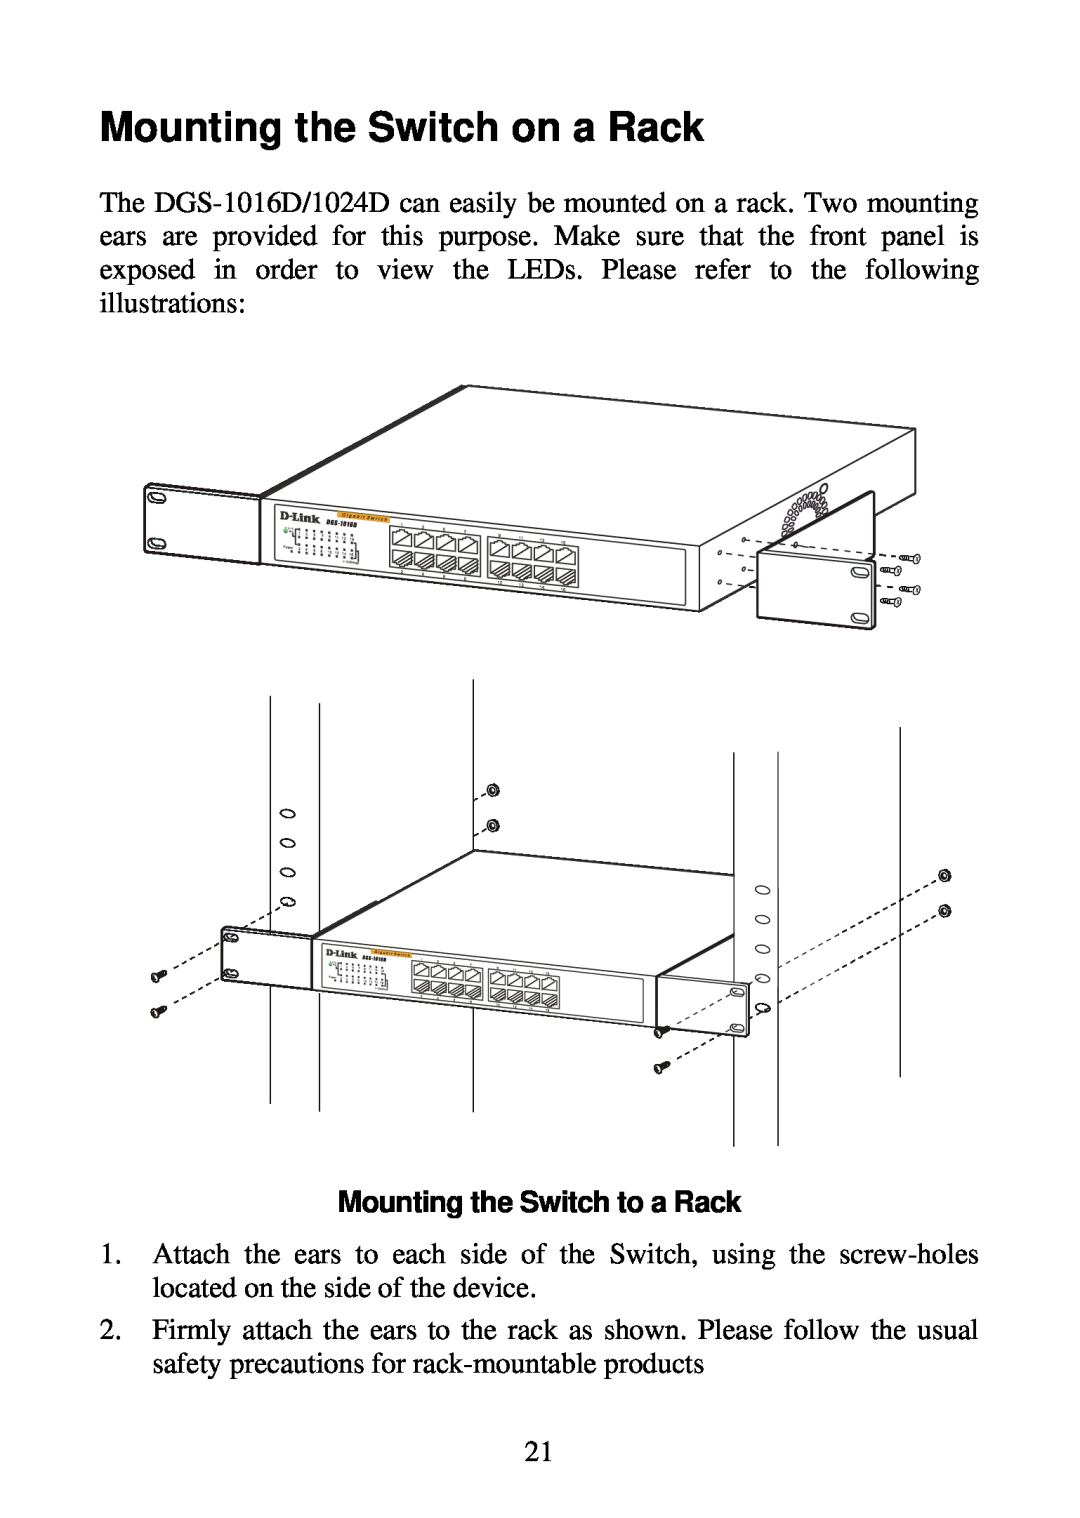 D-Link DGS-1016D, DGS-1024D manual Mounting the Switch on a Rack, Mounting the Switch to a Rack 